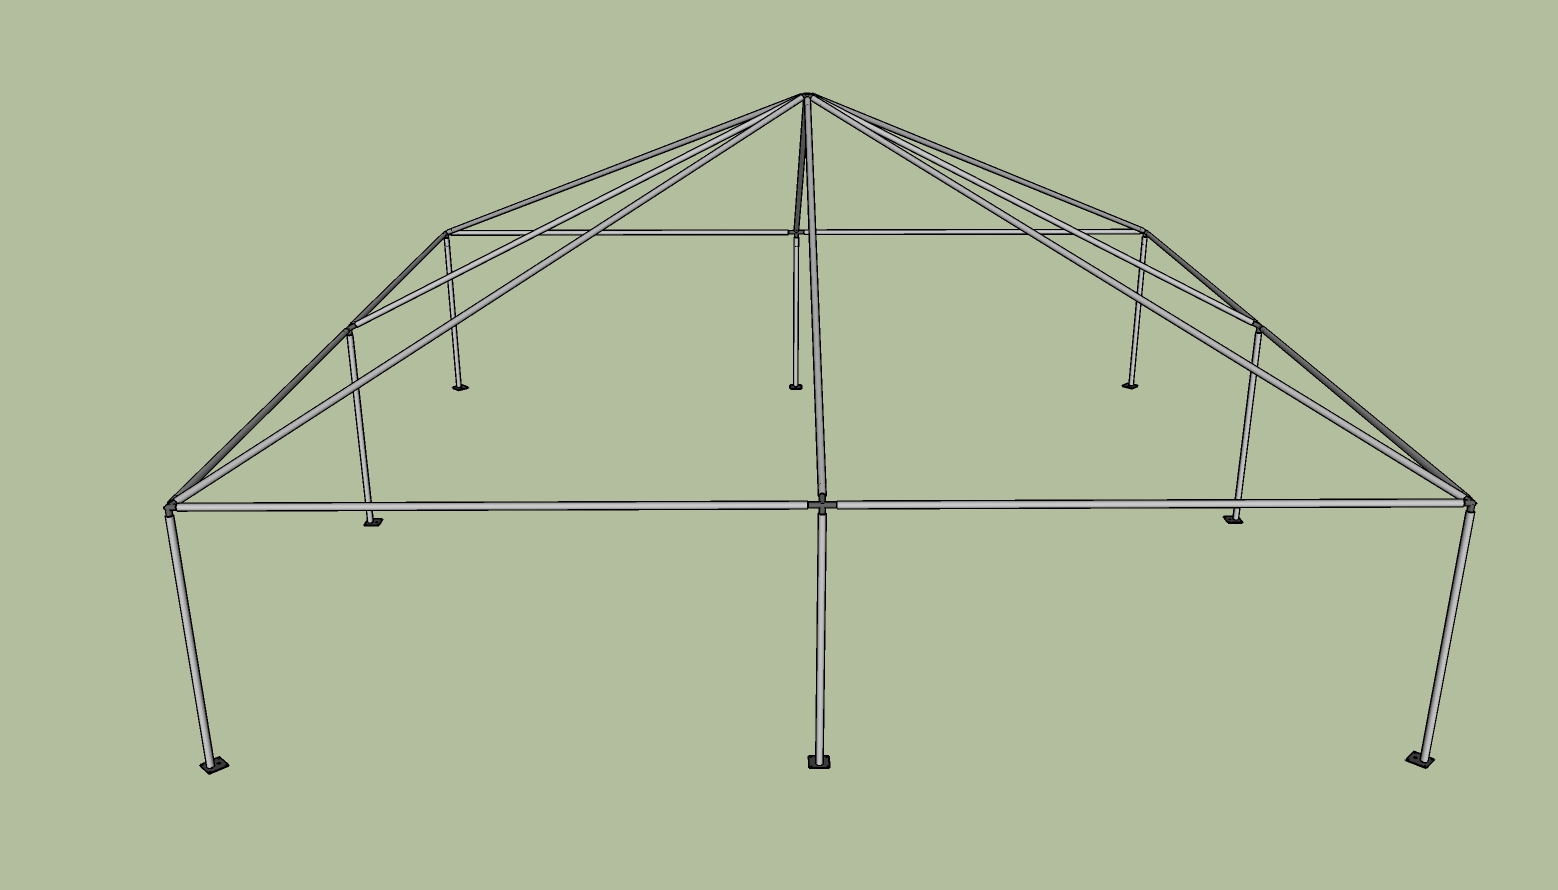 30x30 frame tent side view